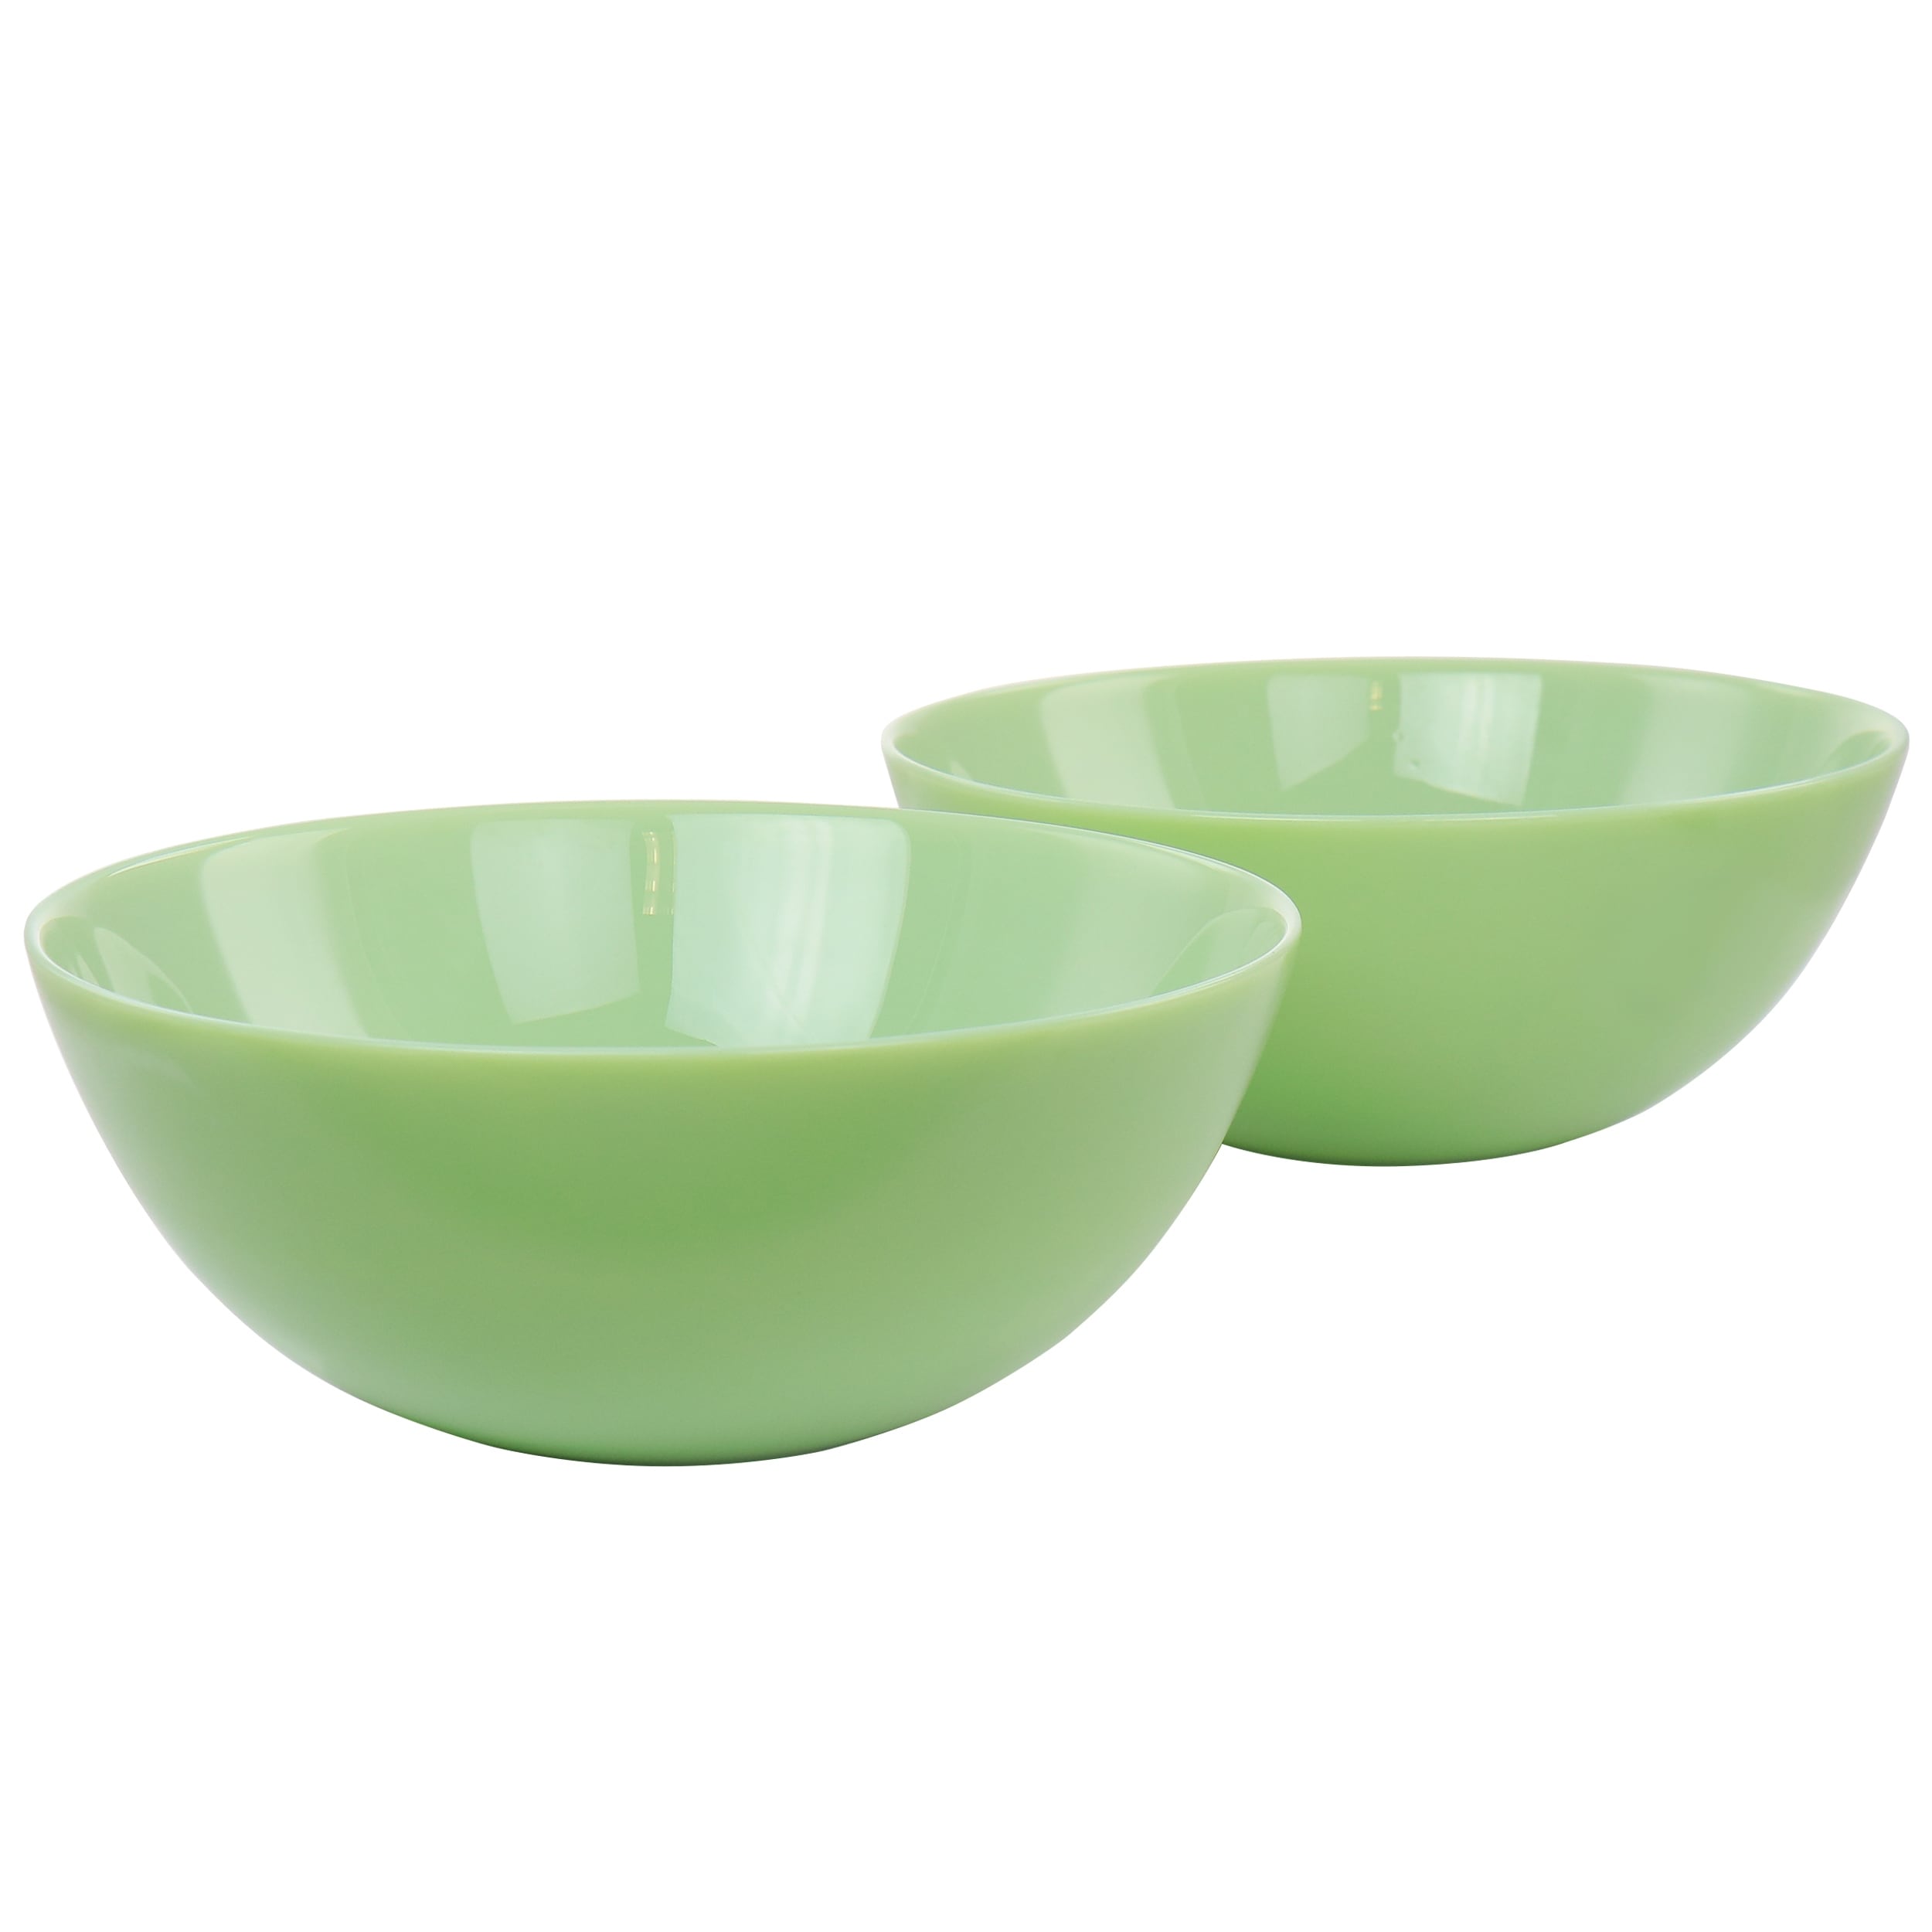 https://ak1.ostkcdn.com/images/products/is/images/direct/189f26f1440b5964caa81465be9a8310d931f490/Martha-Stewart-2-Piece-10in-Jadeite-Glass-Serving-Bowl-Set-in-Jade.jpg